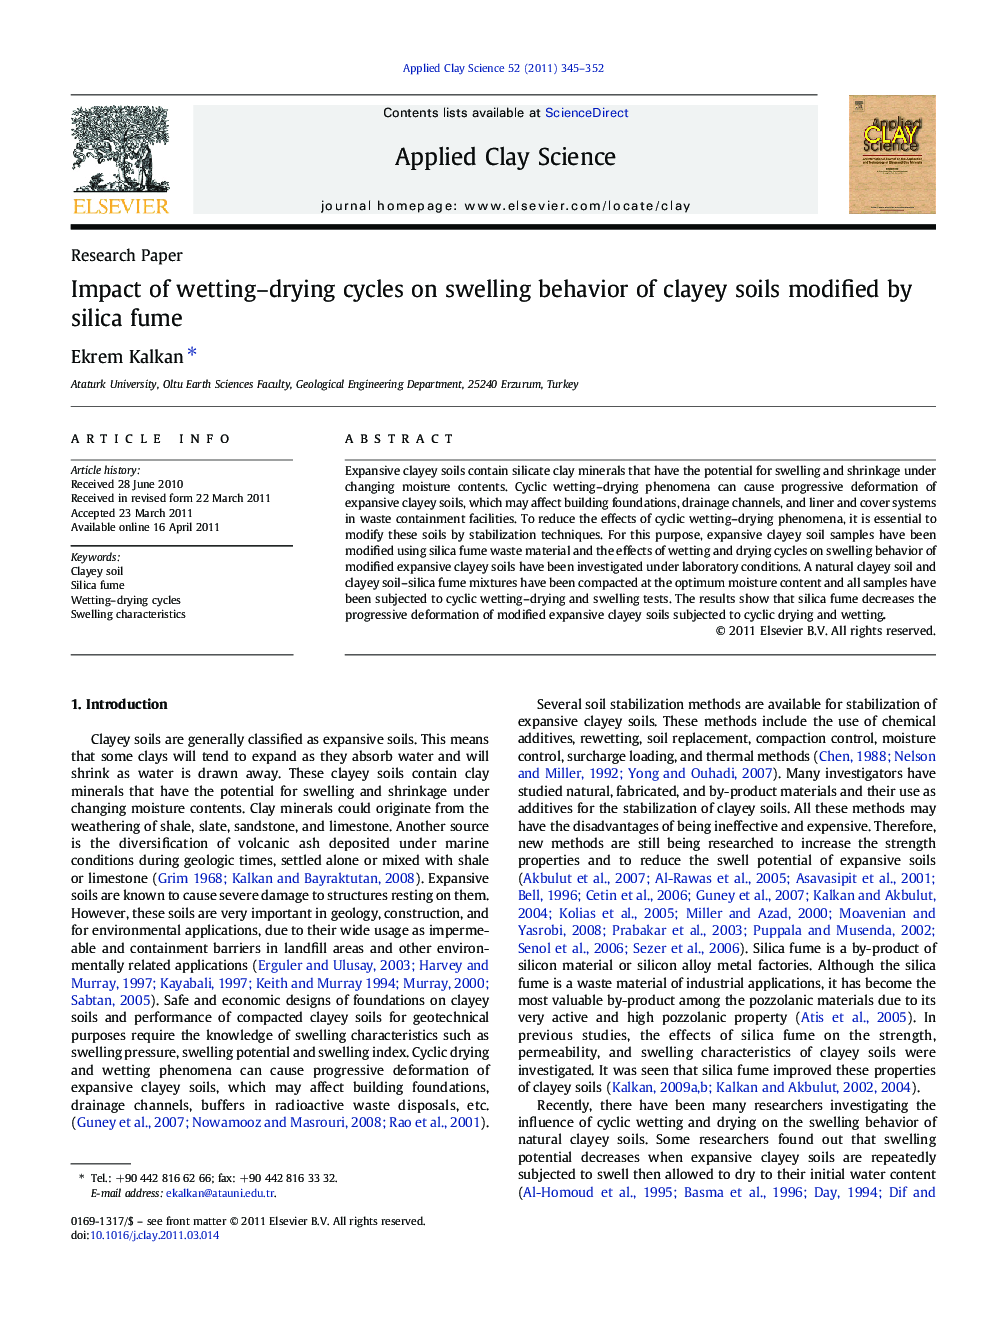 Impact of wetting–drying cycles on swelling behavior of clayey soils modified by silica fume